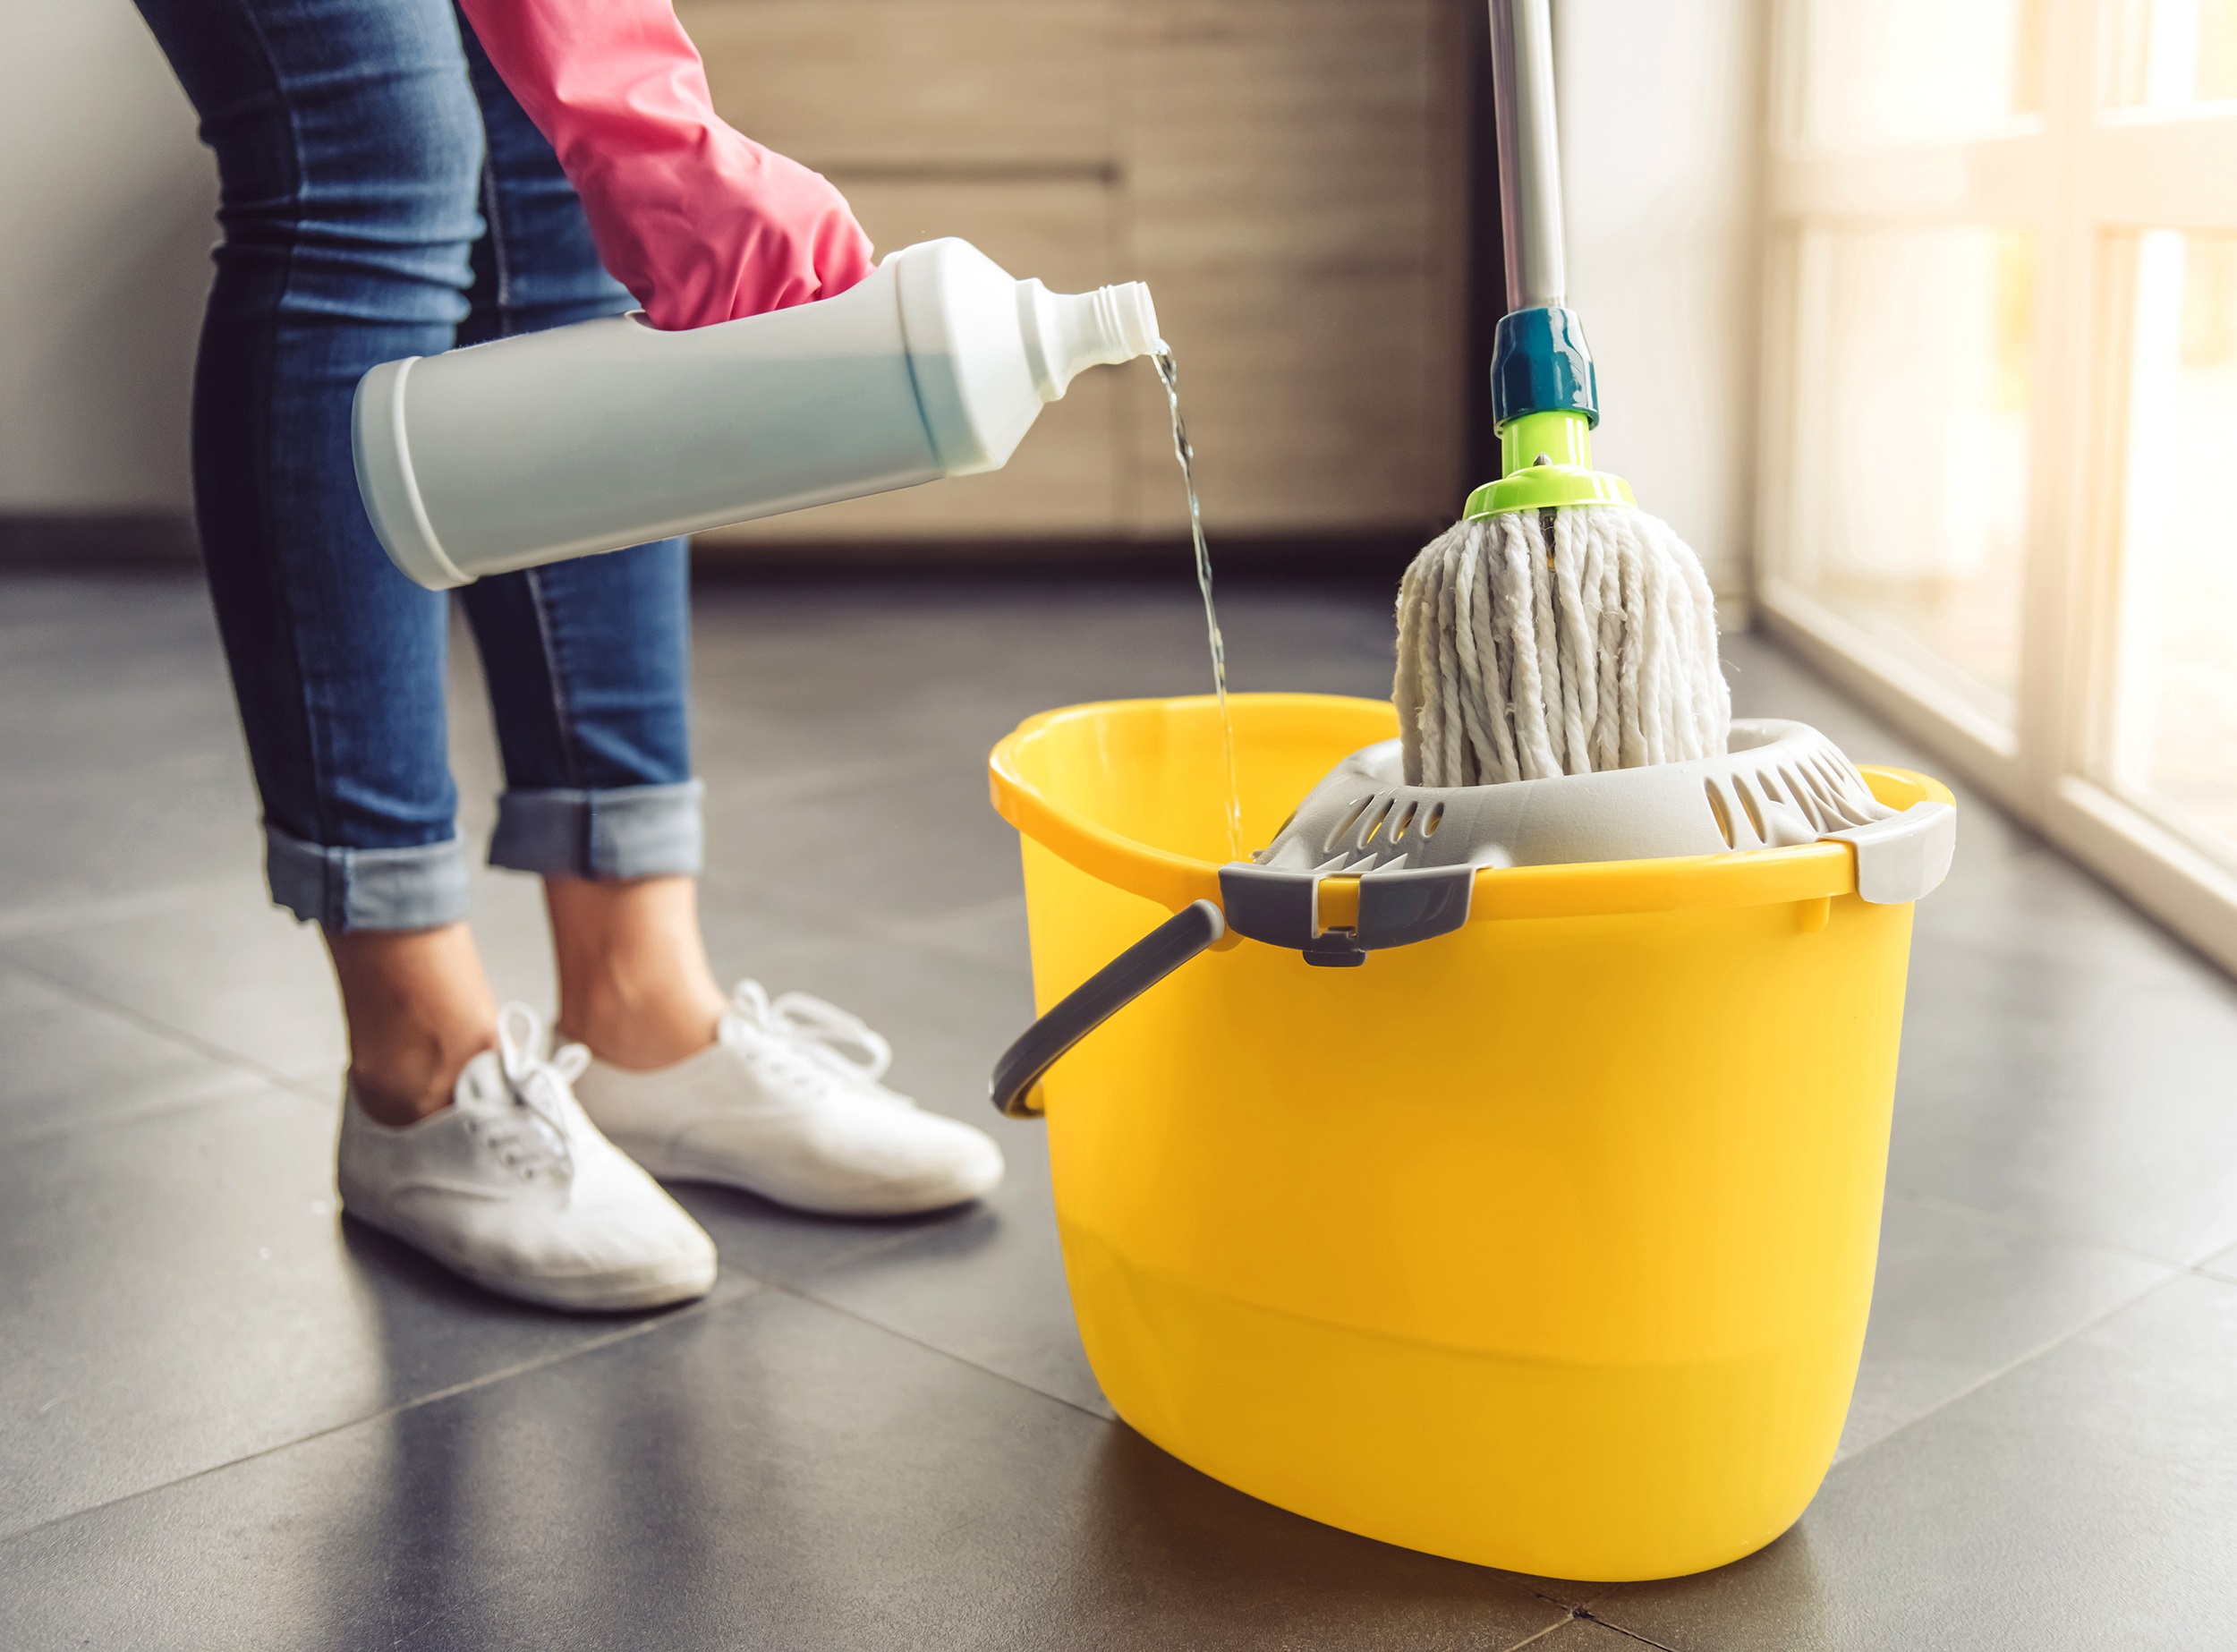 Do You Know How You Can Maintain Your Home’s Hygiene?